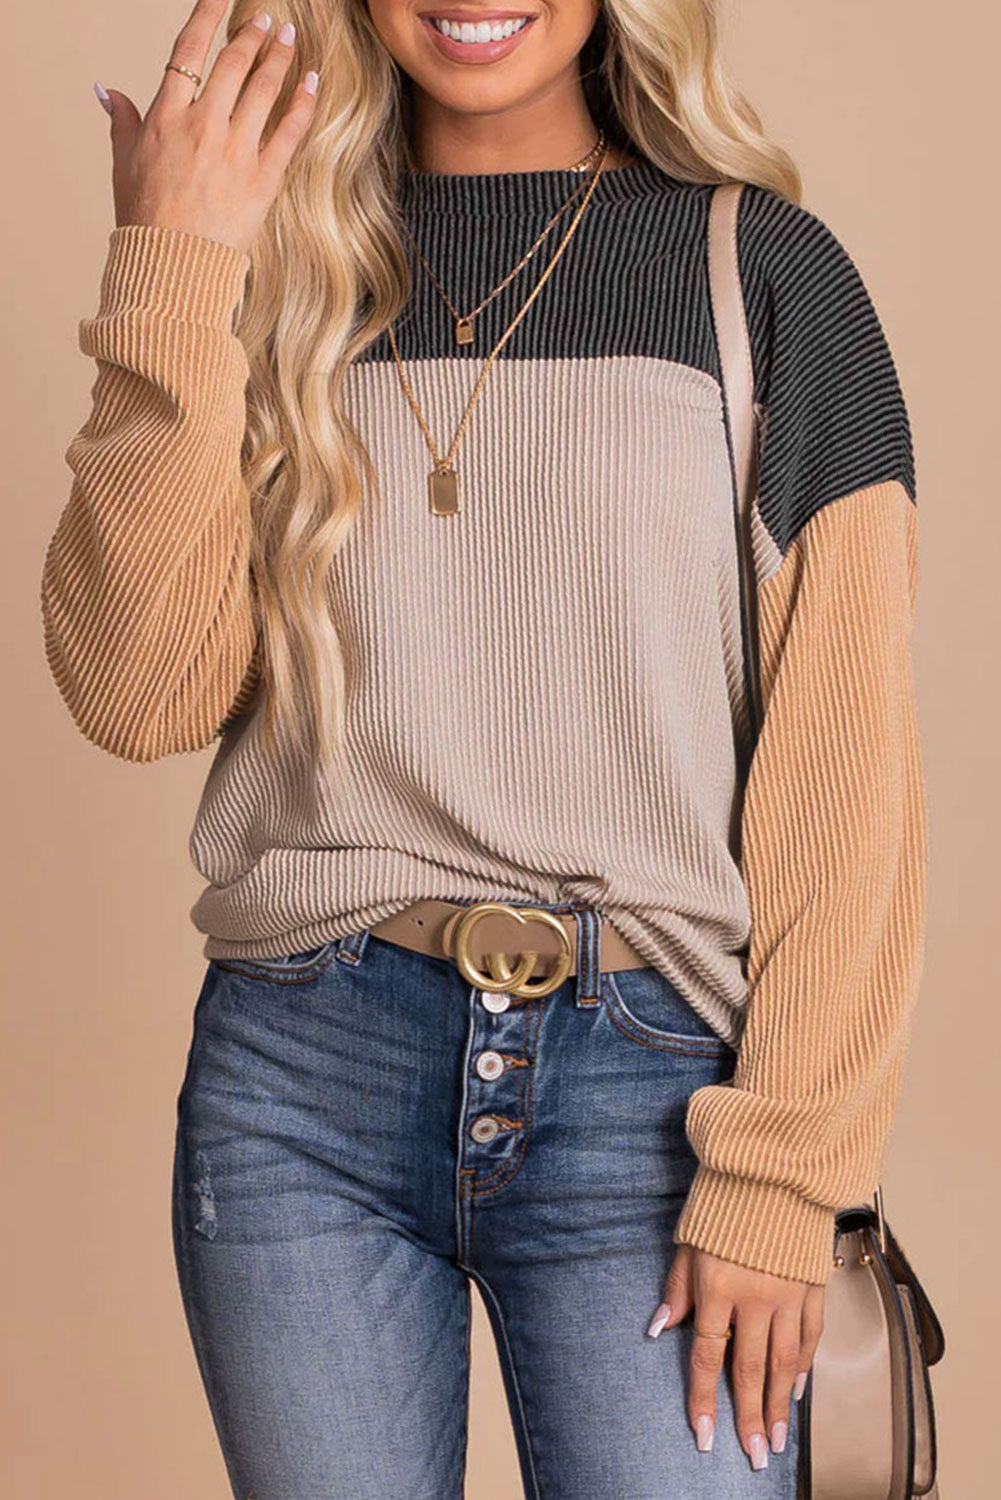 Cali Chic Women Black Color Block Celebrity Long Sleeve Ribbed Loose Top